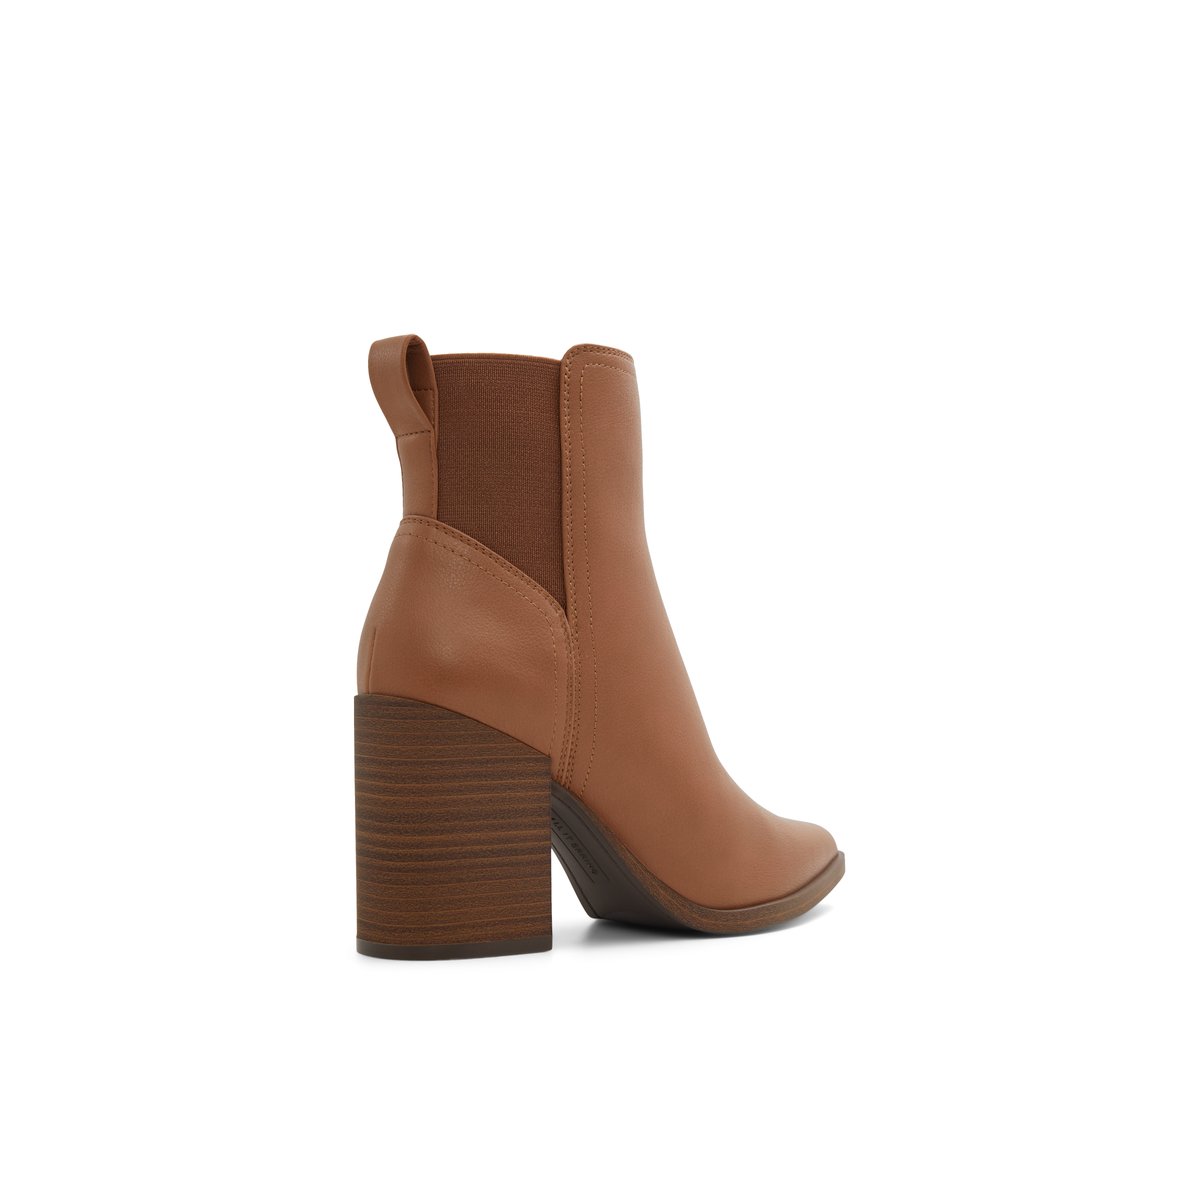 Liza Cognac Women's Ankle Boots | Call It Spring Canada